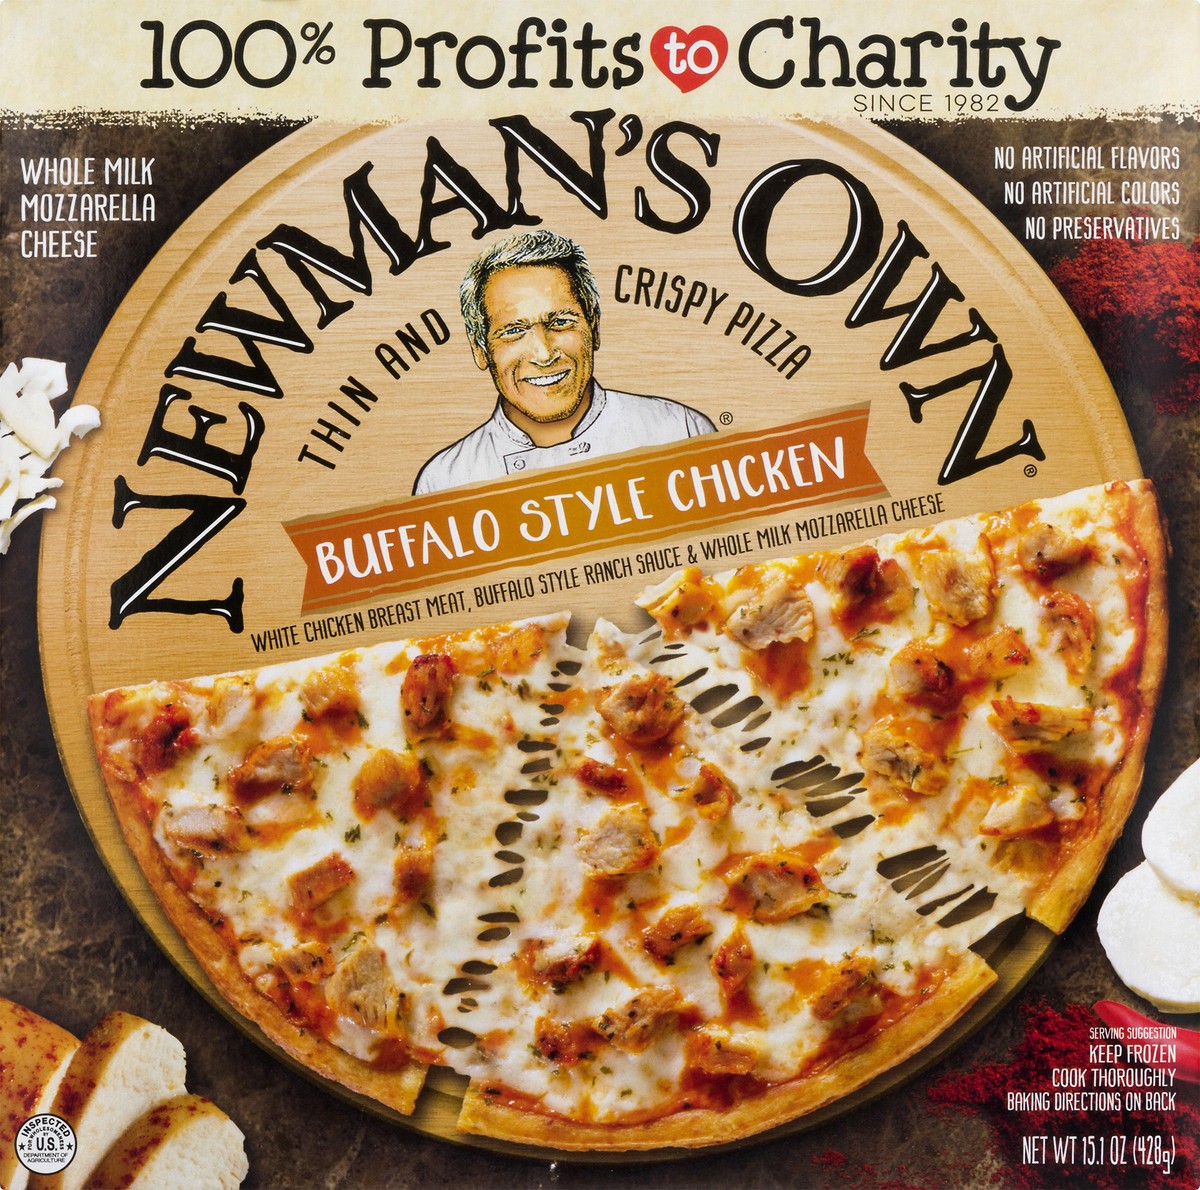 slide 4 of 10, Newman's Own Thin and Crispy Crust Buffalo Style Chicken Pizza 15.1 oz, 15.1 oz